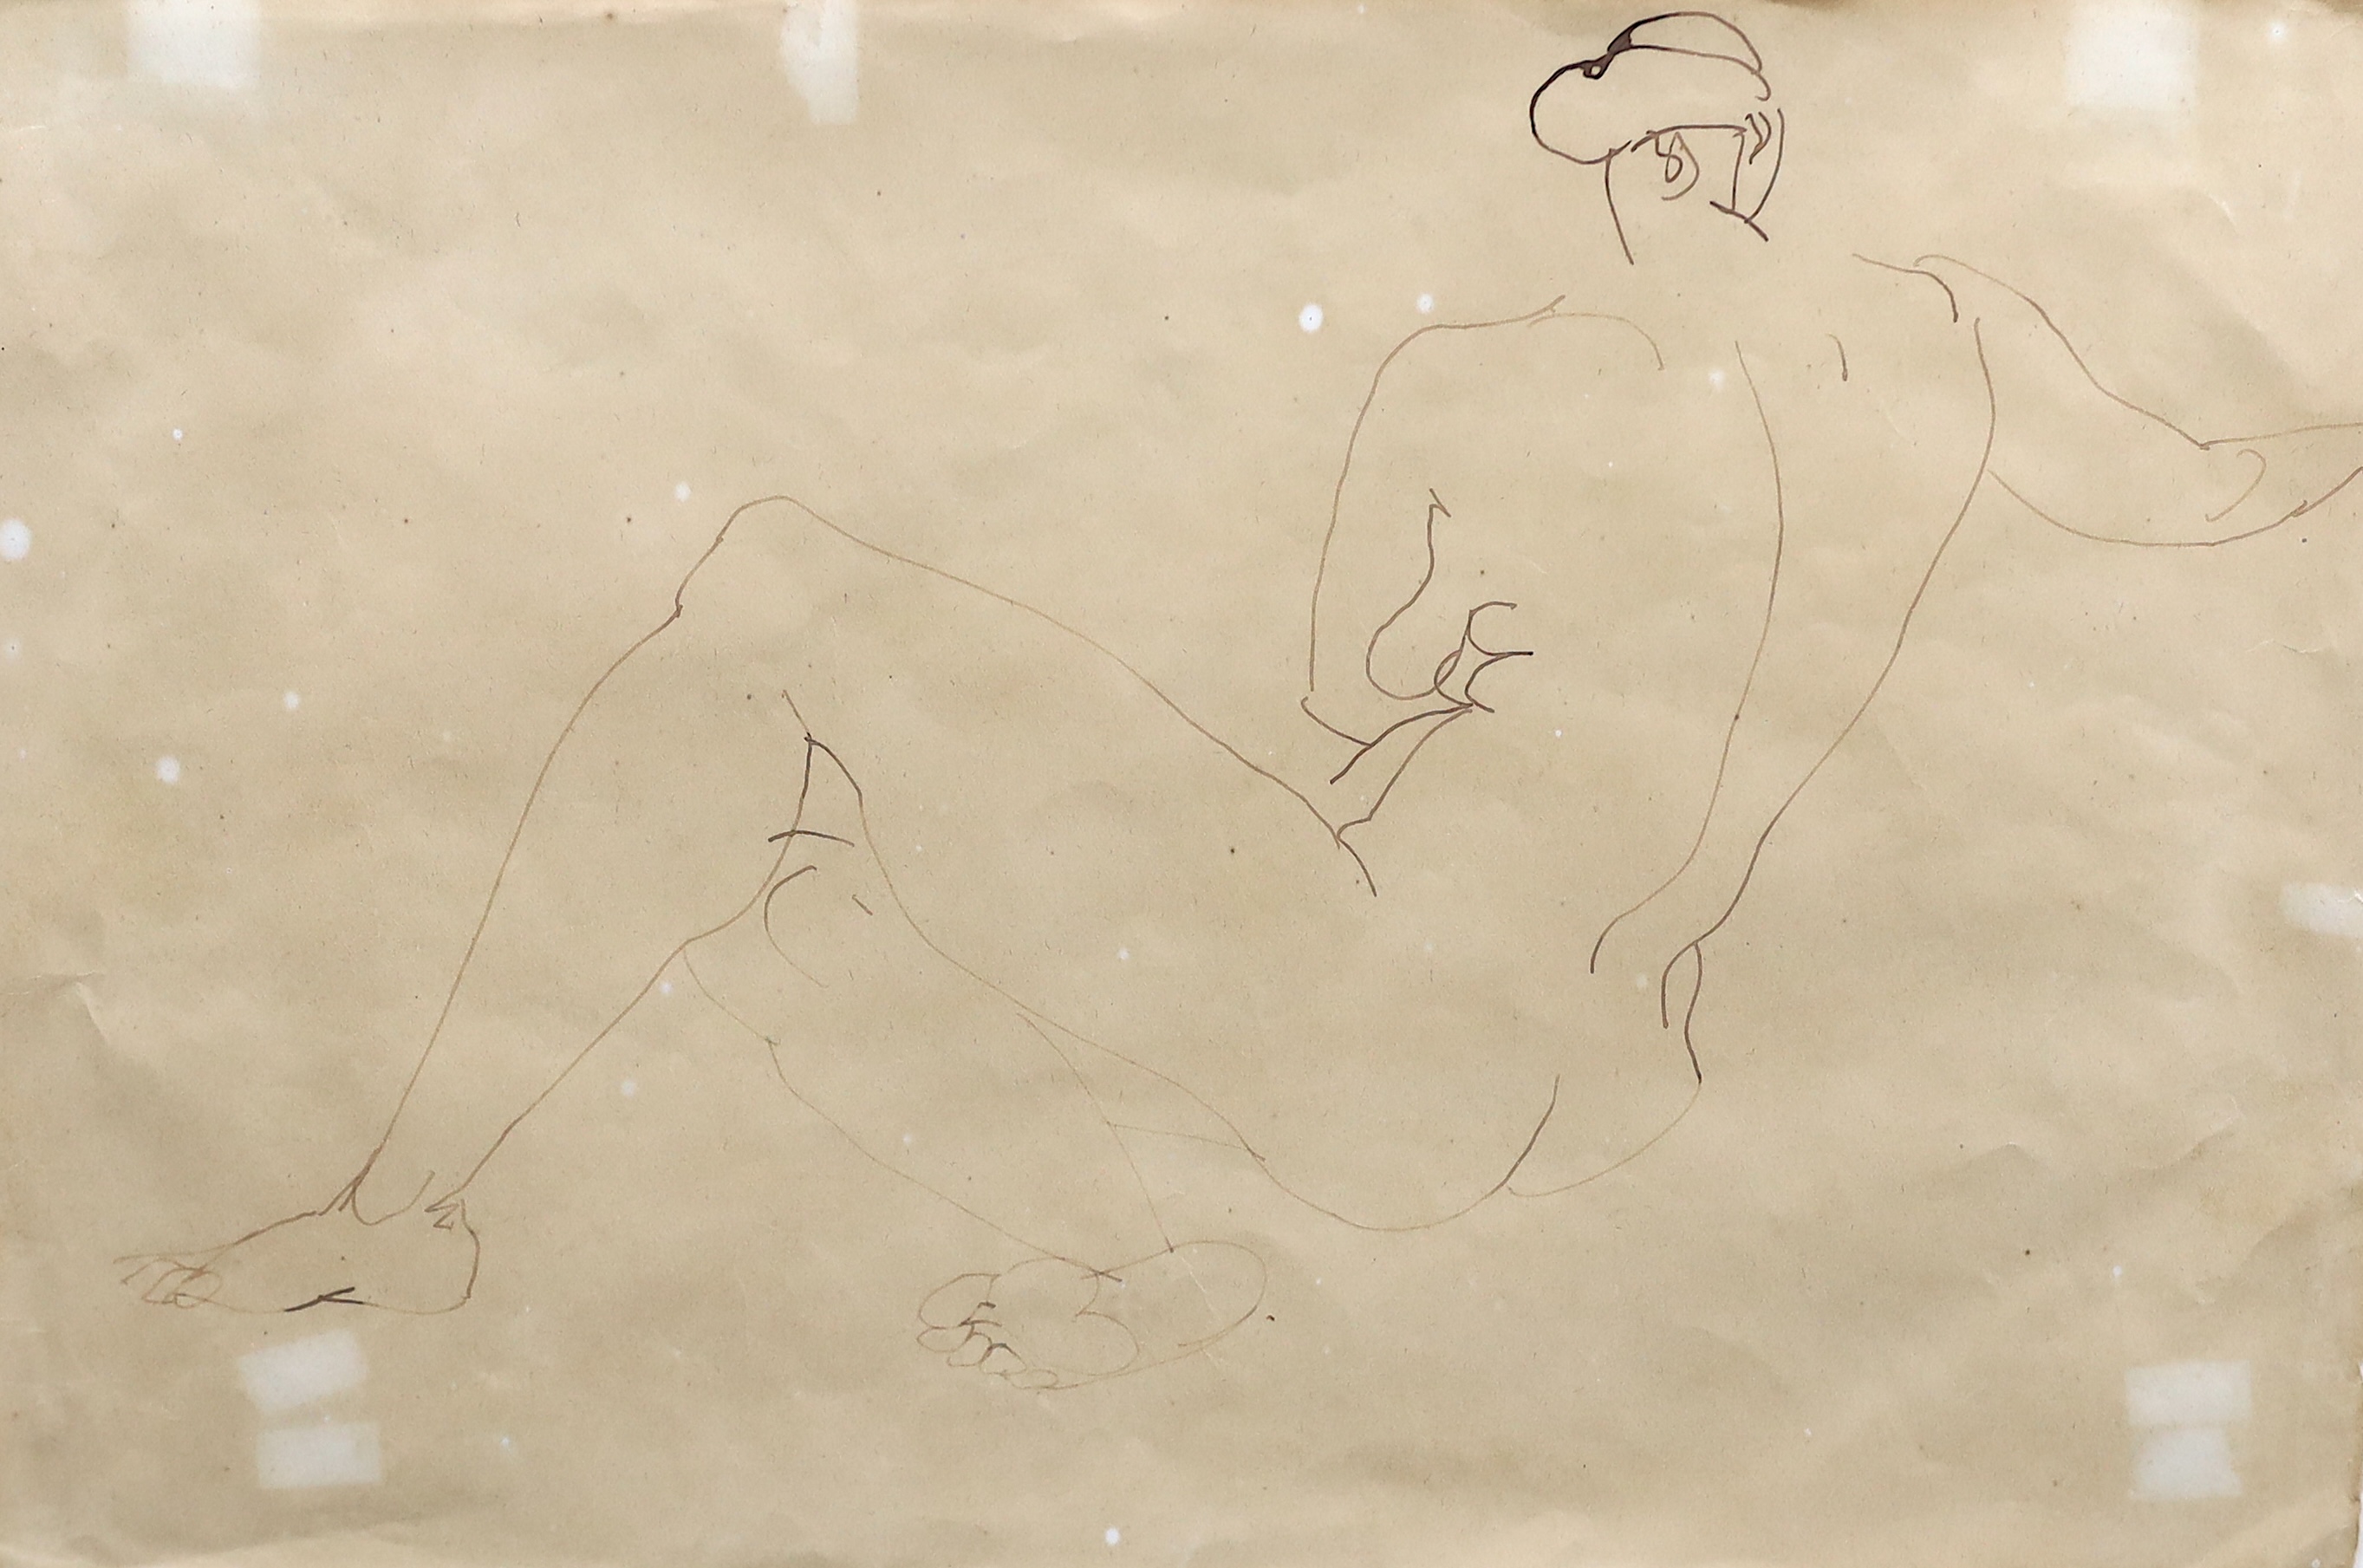 Henri Gaudier-Brzeska (French, 1891-1915), pen and ink on paper, Reclining nude, 26 x 38cm. Provenance: Colnaghi, thence private collection East Sussex. Condition - poor to fair.